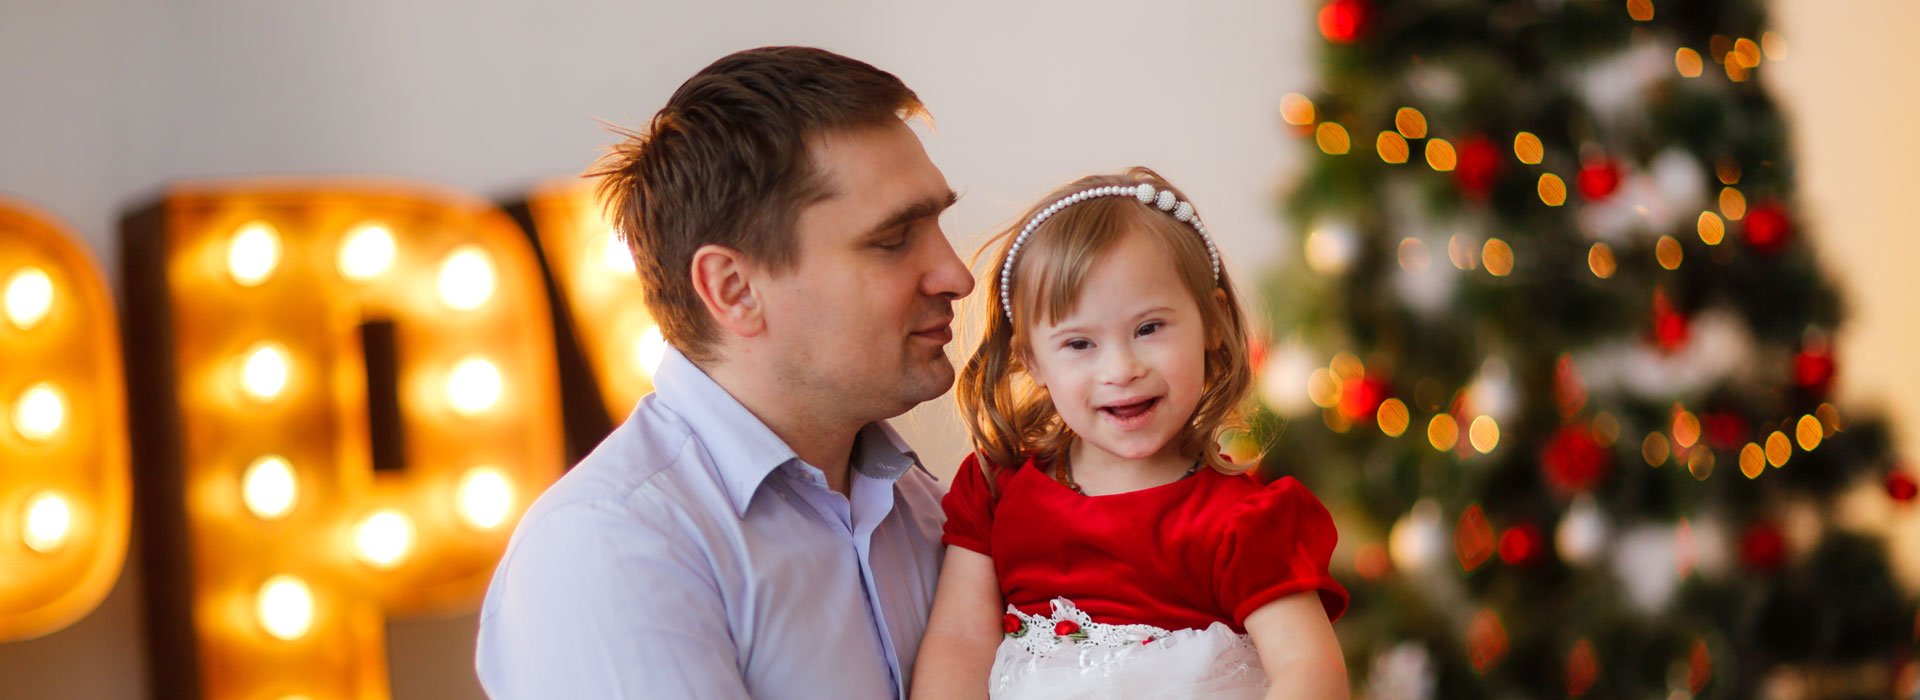 image: father and child with christmas tree